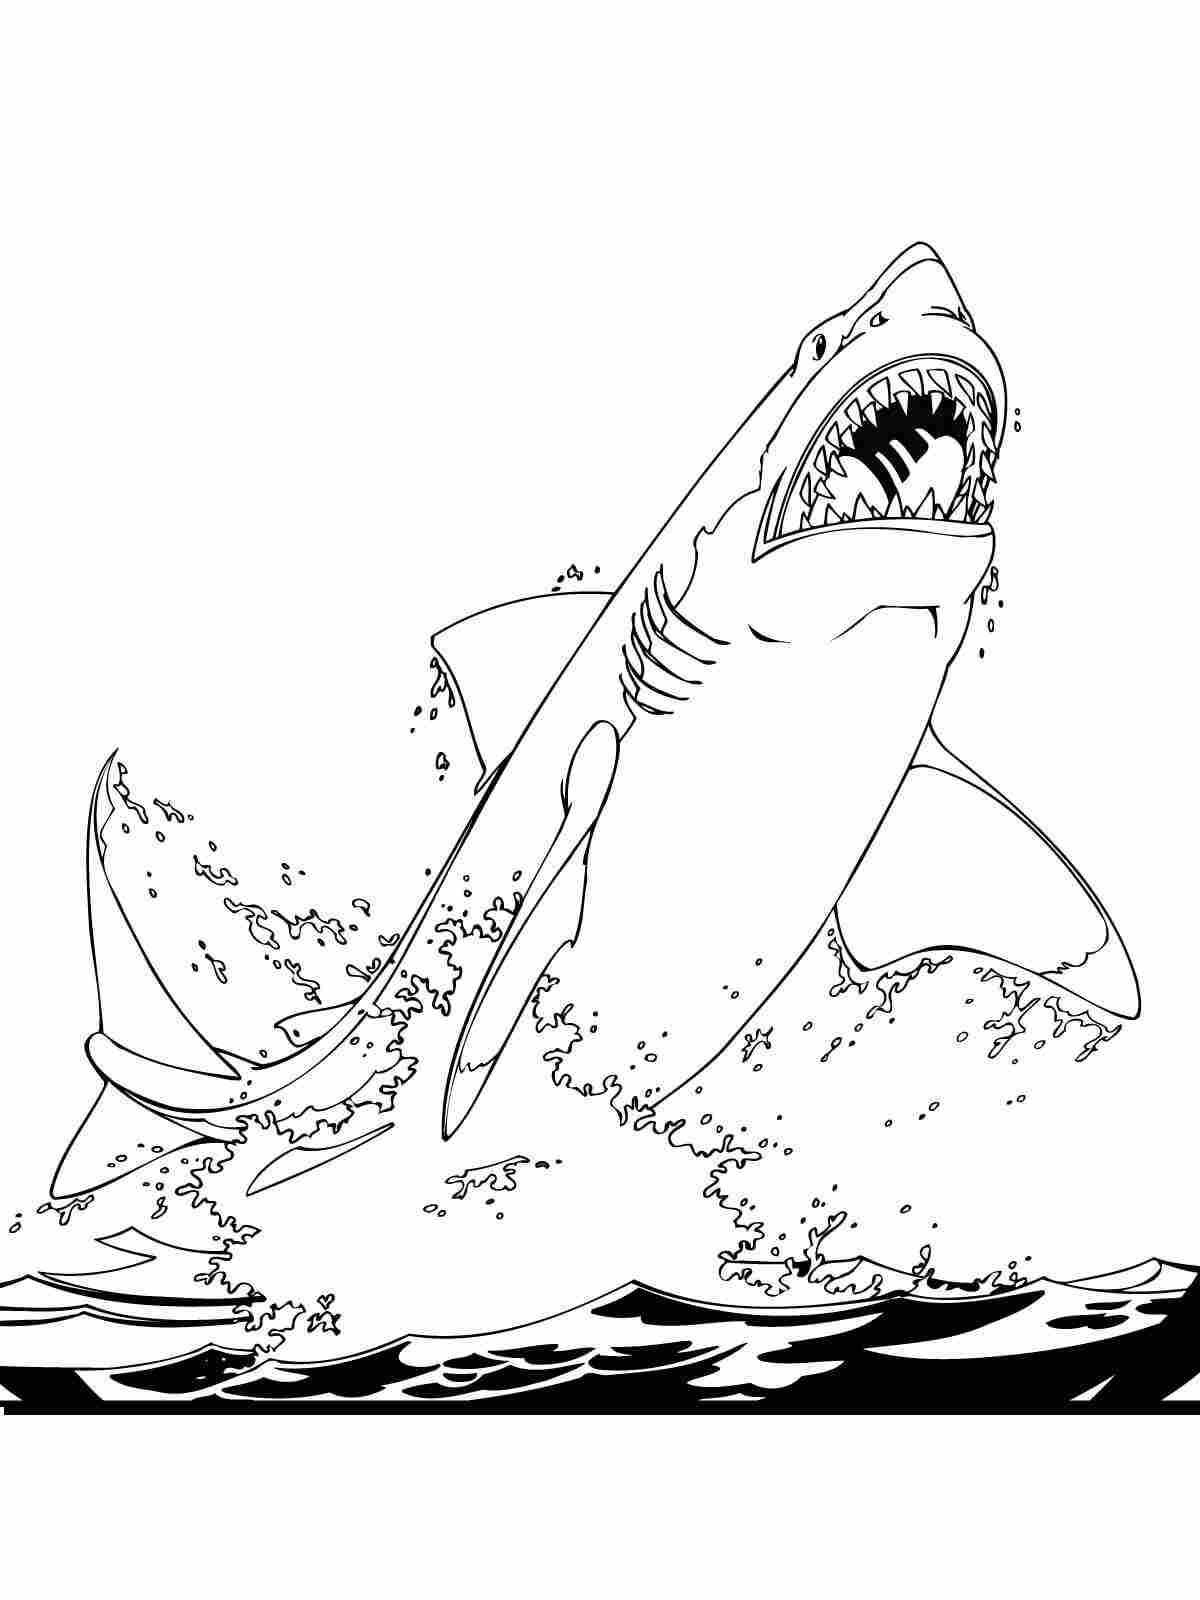 Download The Great White Shark Jumps Out Of The Water Coloring Pages Fish Coloring Pages Coloring Pages For Kids And Adults